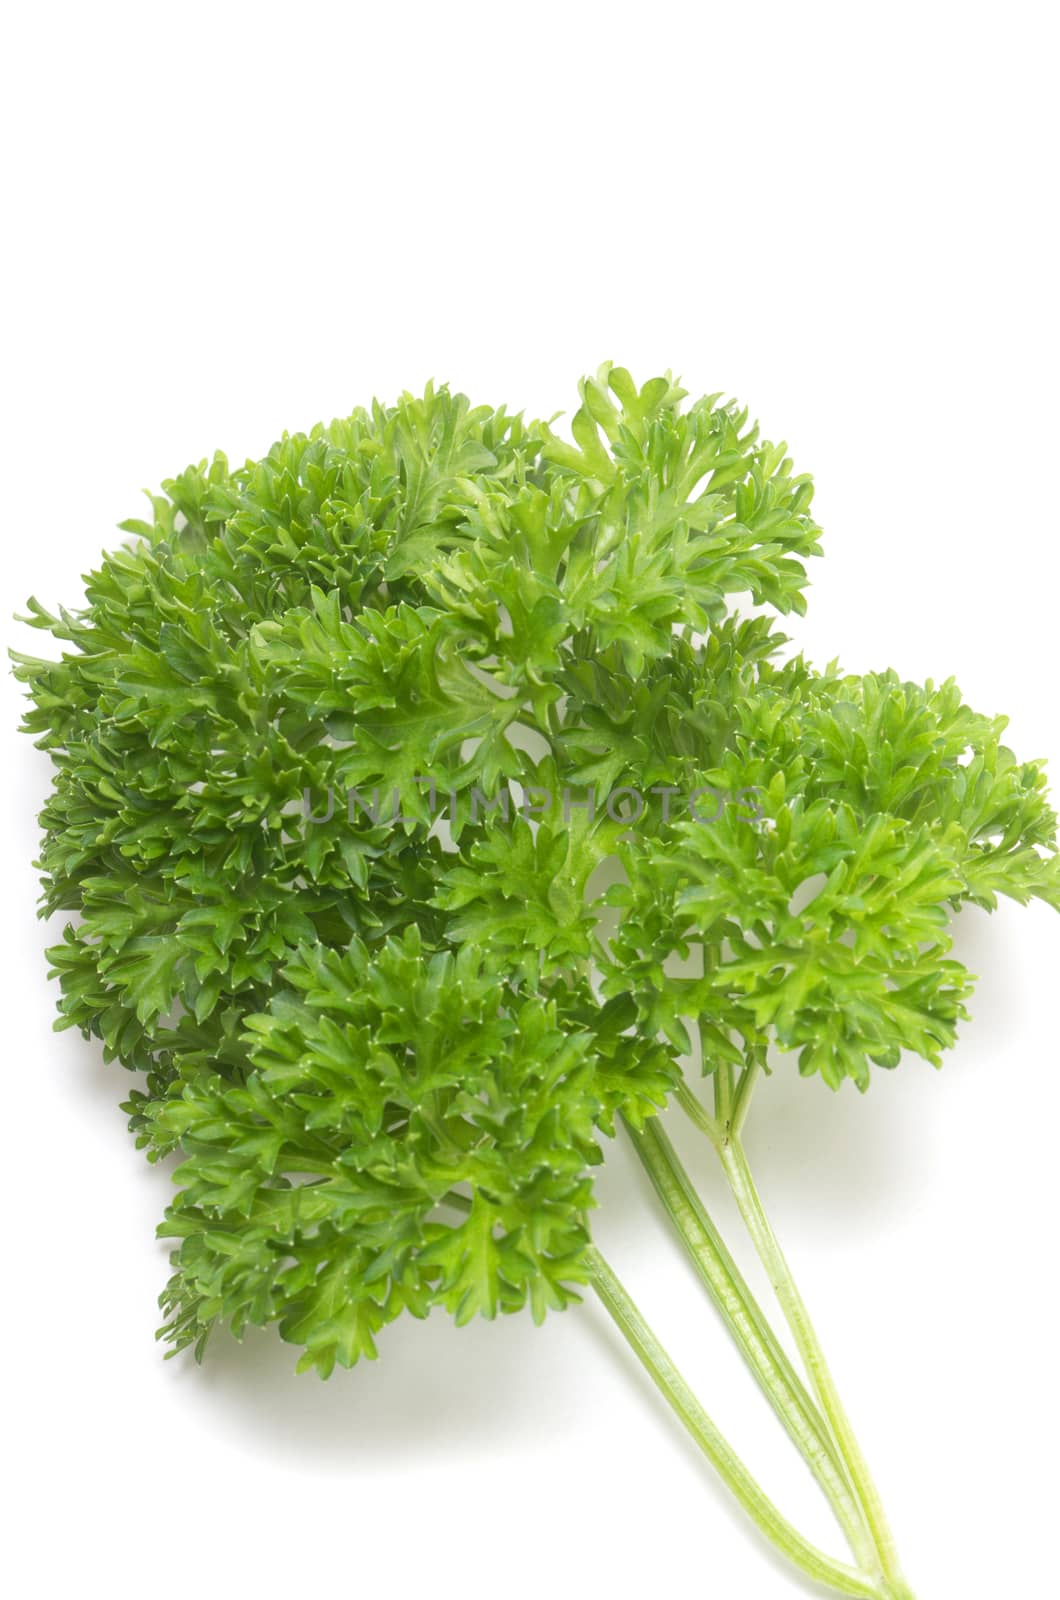 Bunch of fresh Parsley on white background